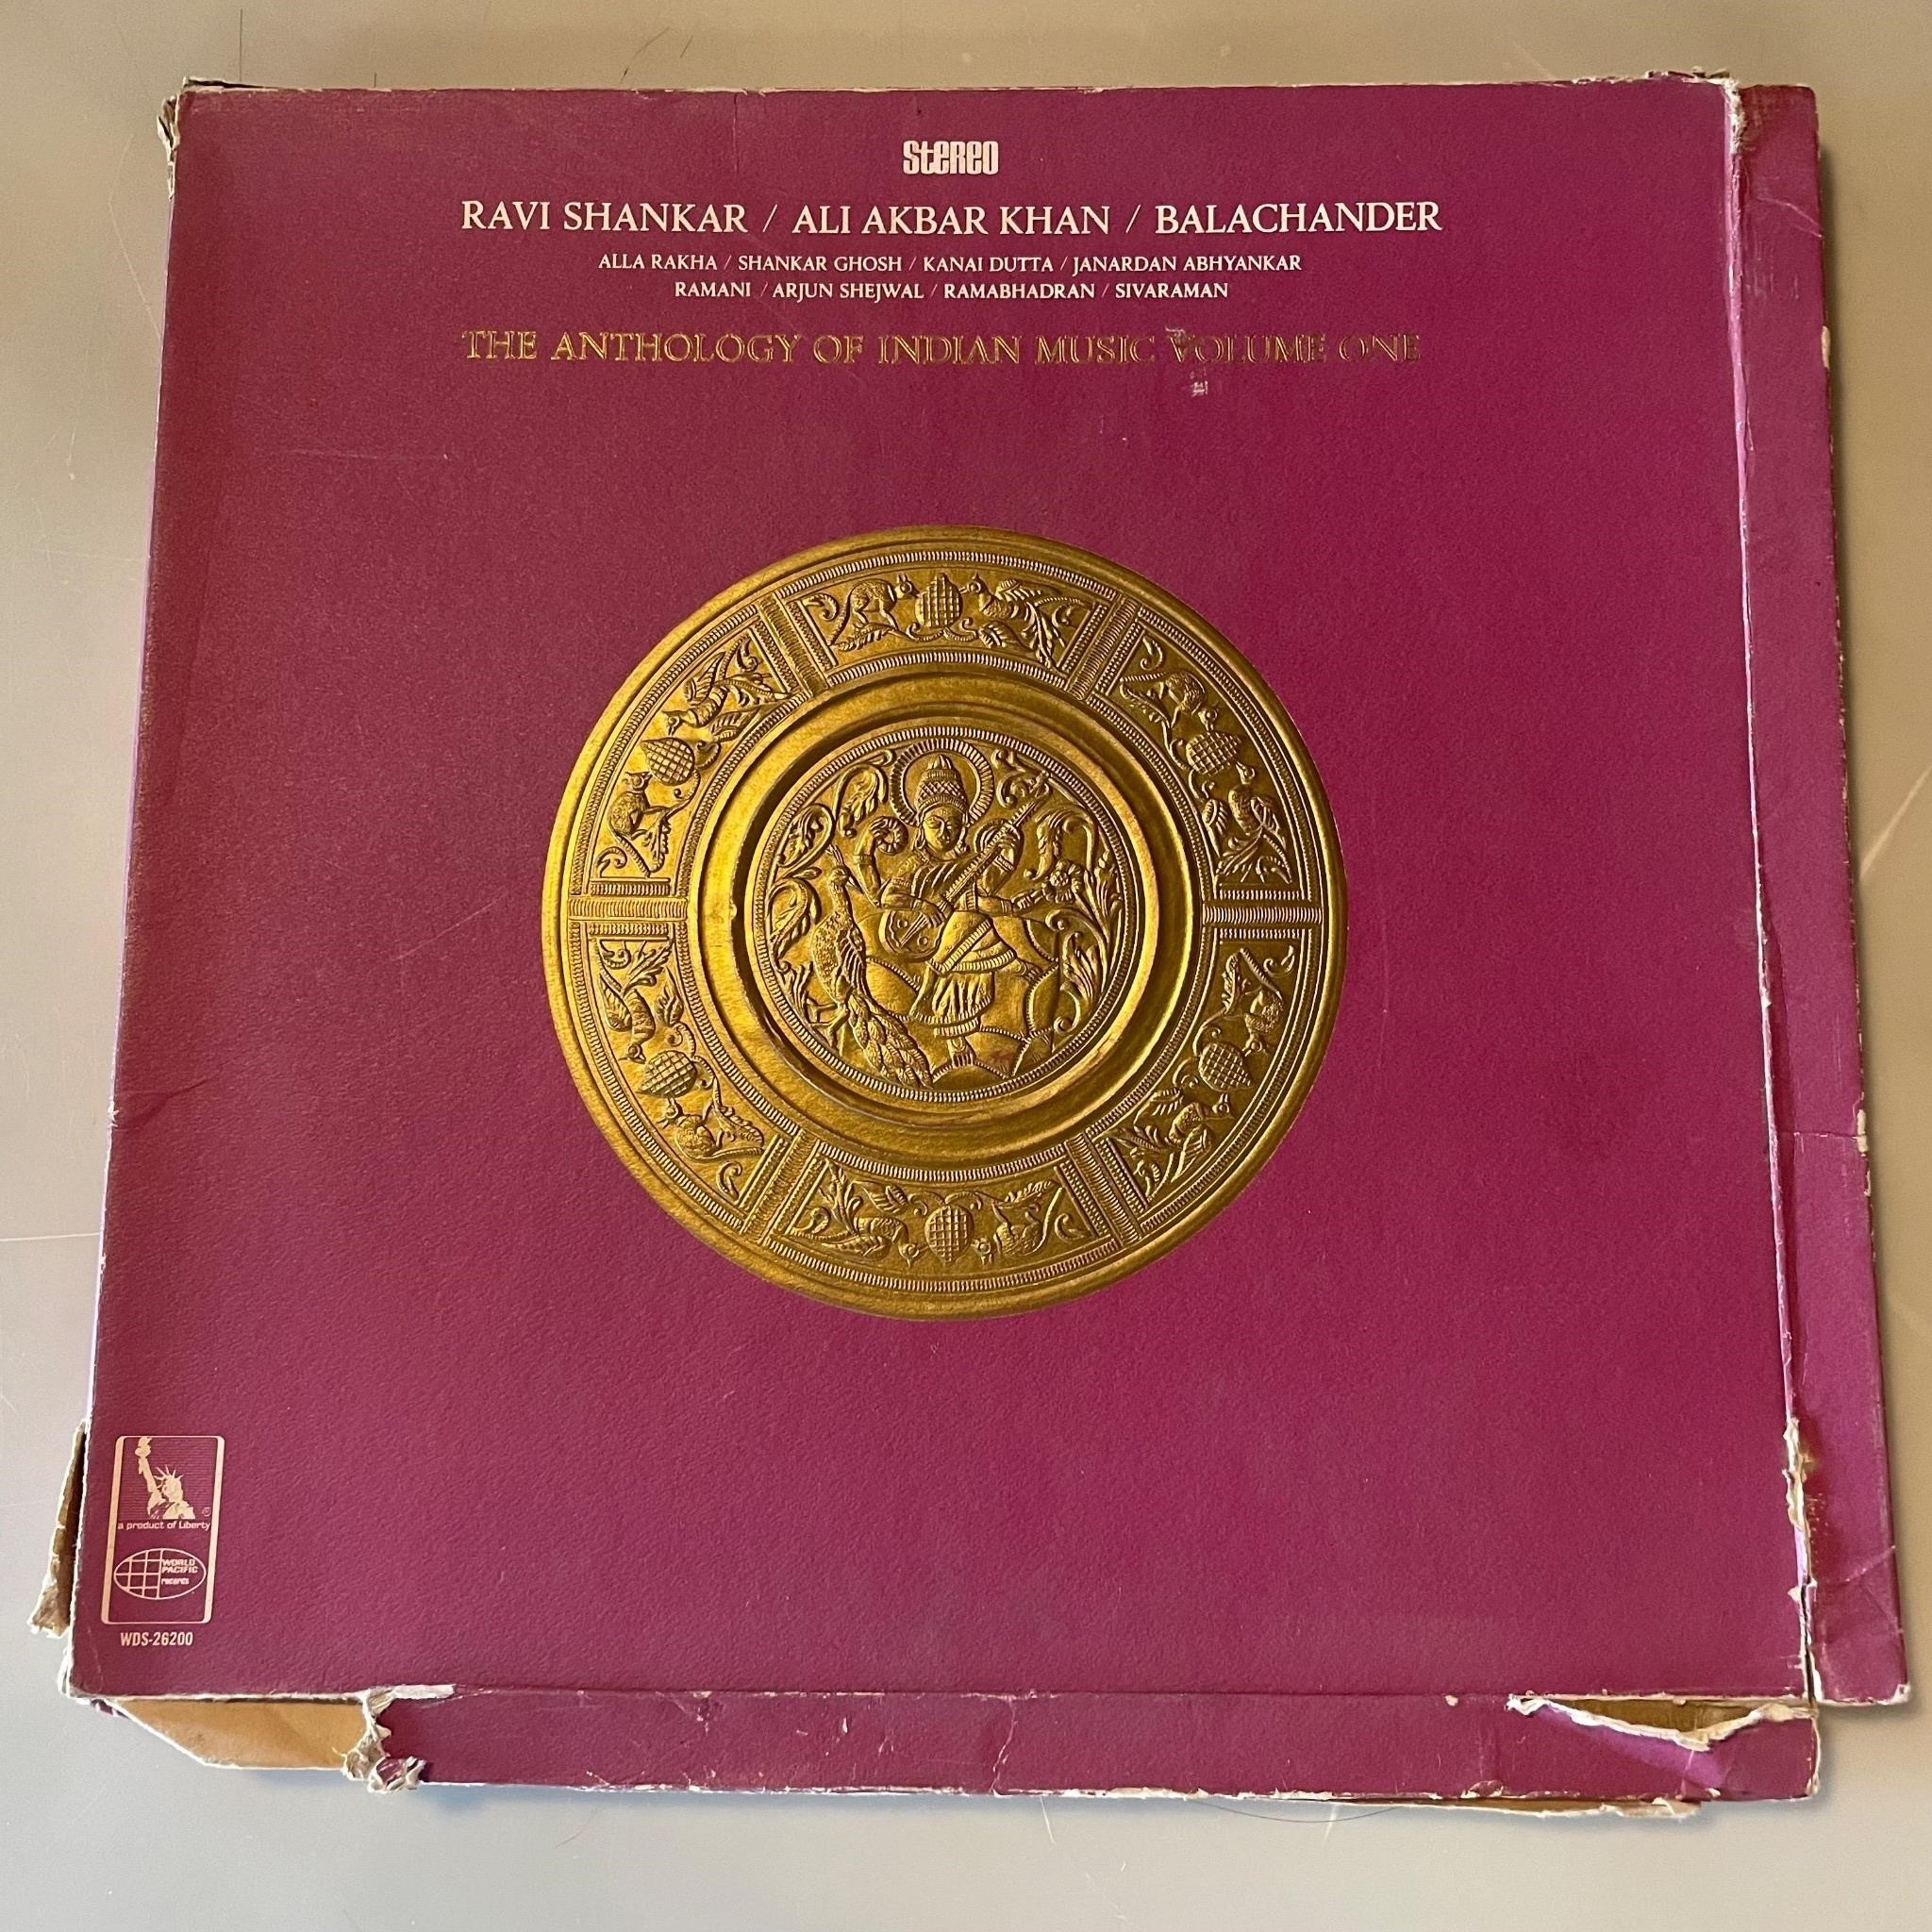 VINYL RECORD Bi-monthly Auction UNLIMITED $12 FLAT RATE SHIP